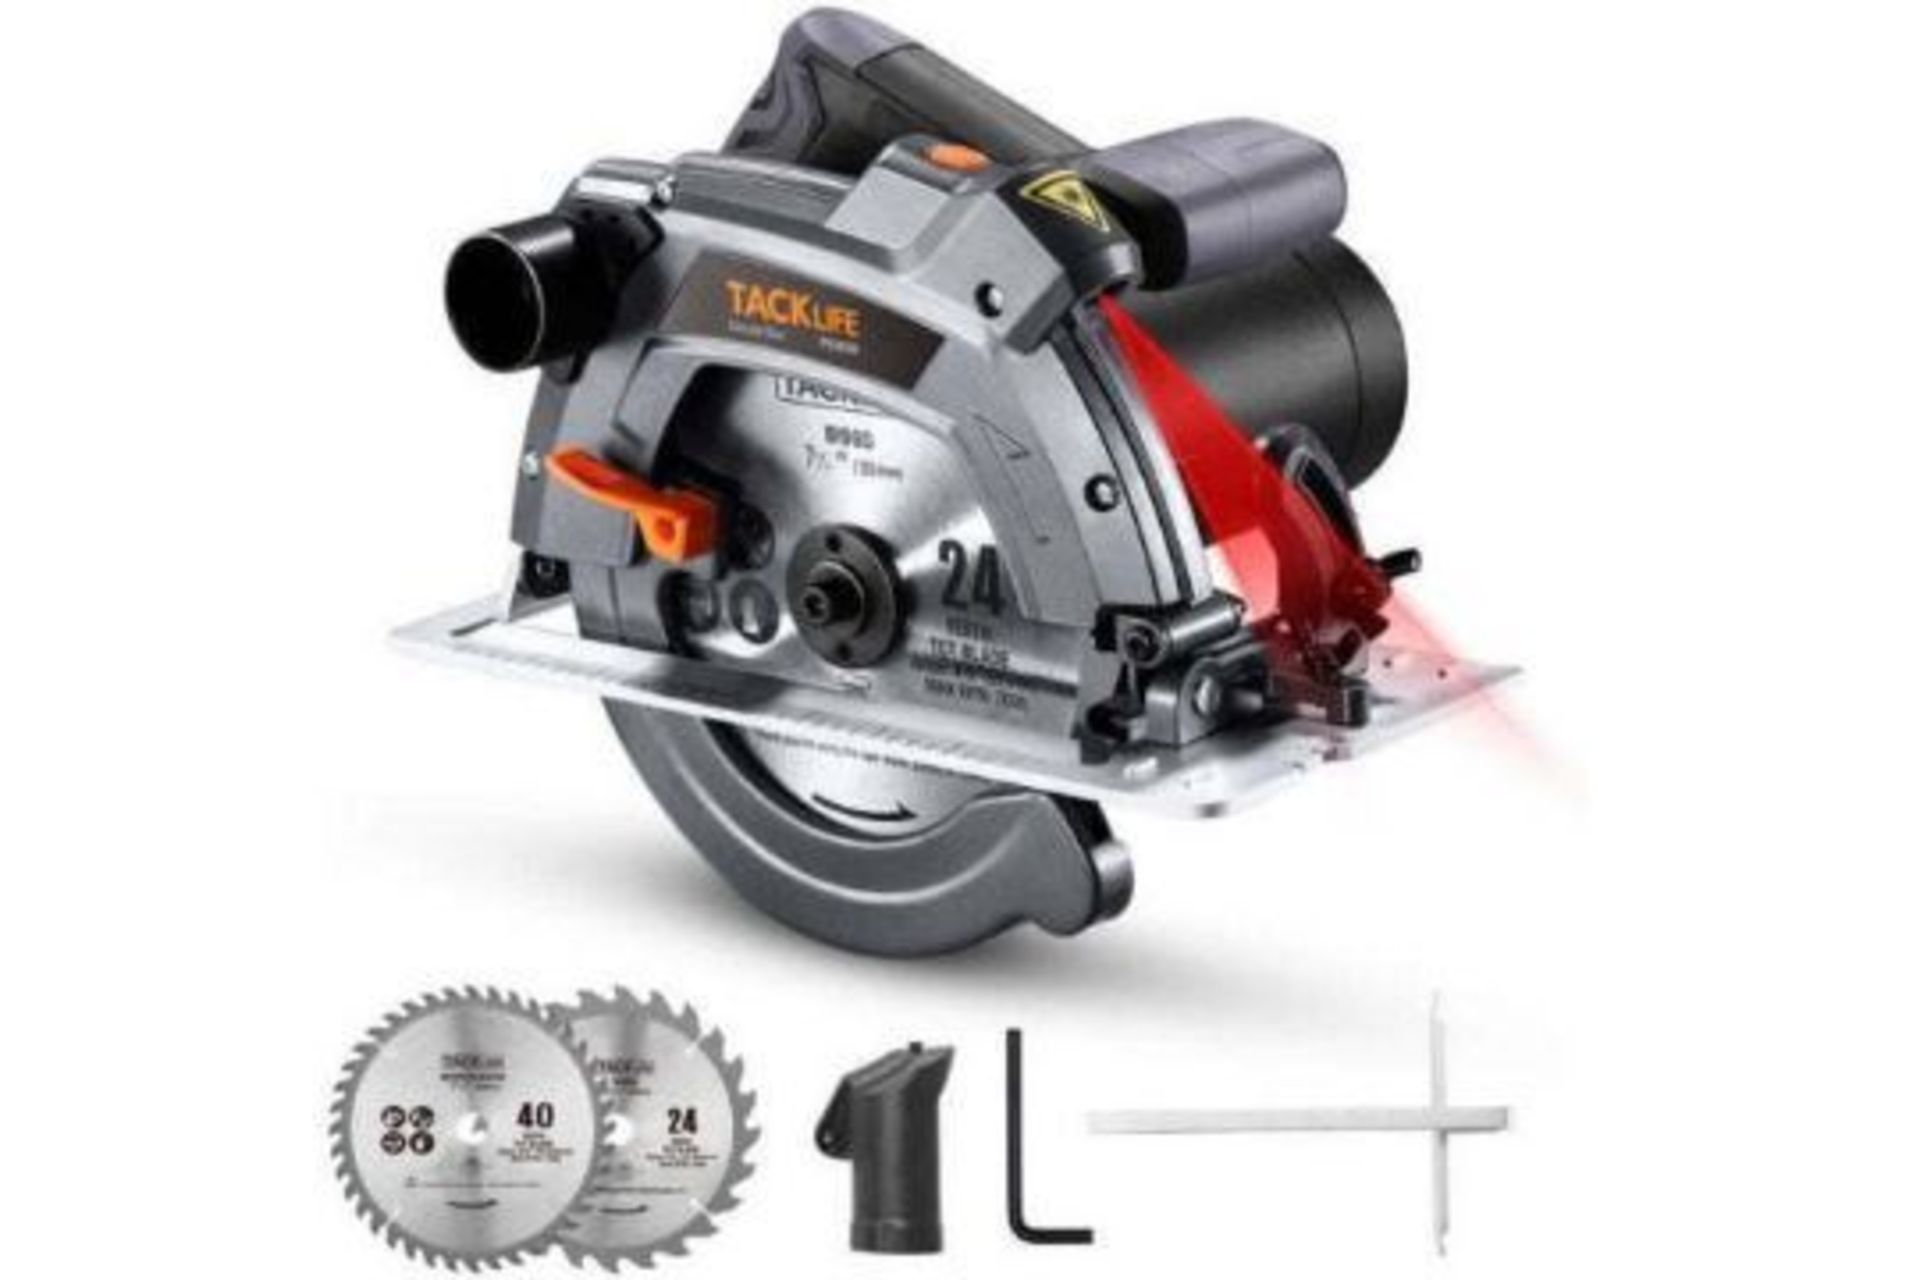 TRADE LOT 10 X NEW BOXED TACKLIFE Electric Circular Saw,1500W, 5000 RPM With Bevel Cuts 2-3/5''. (